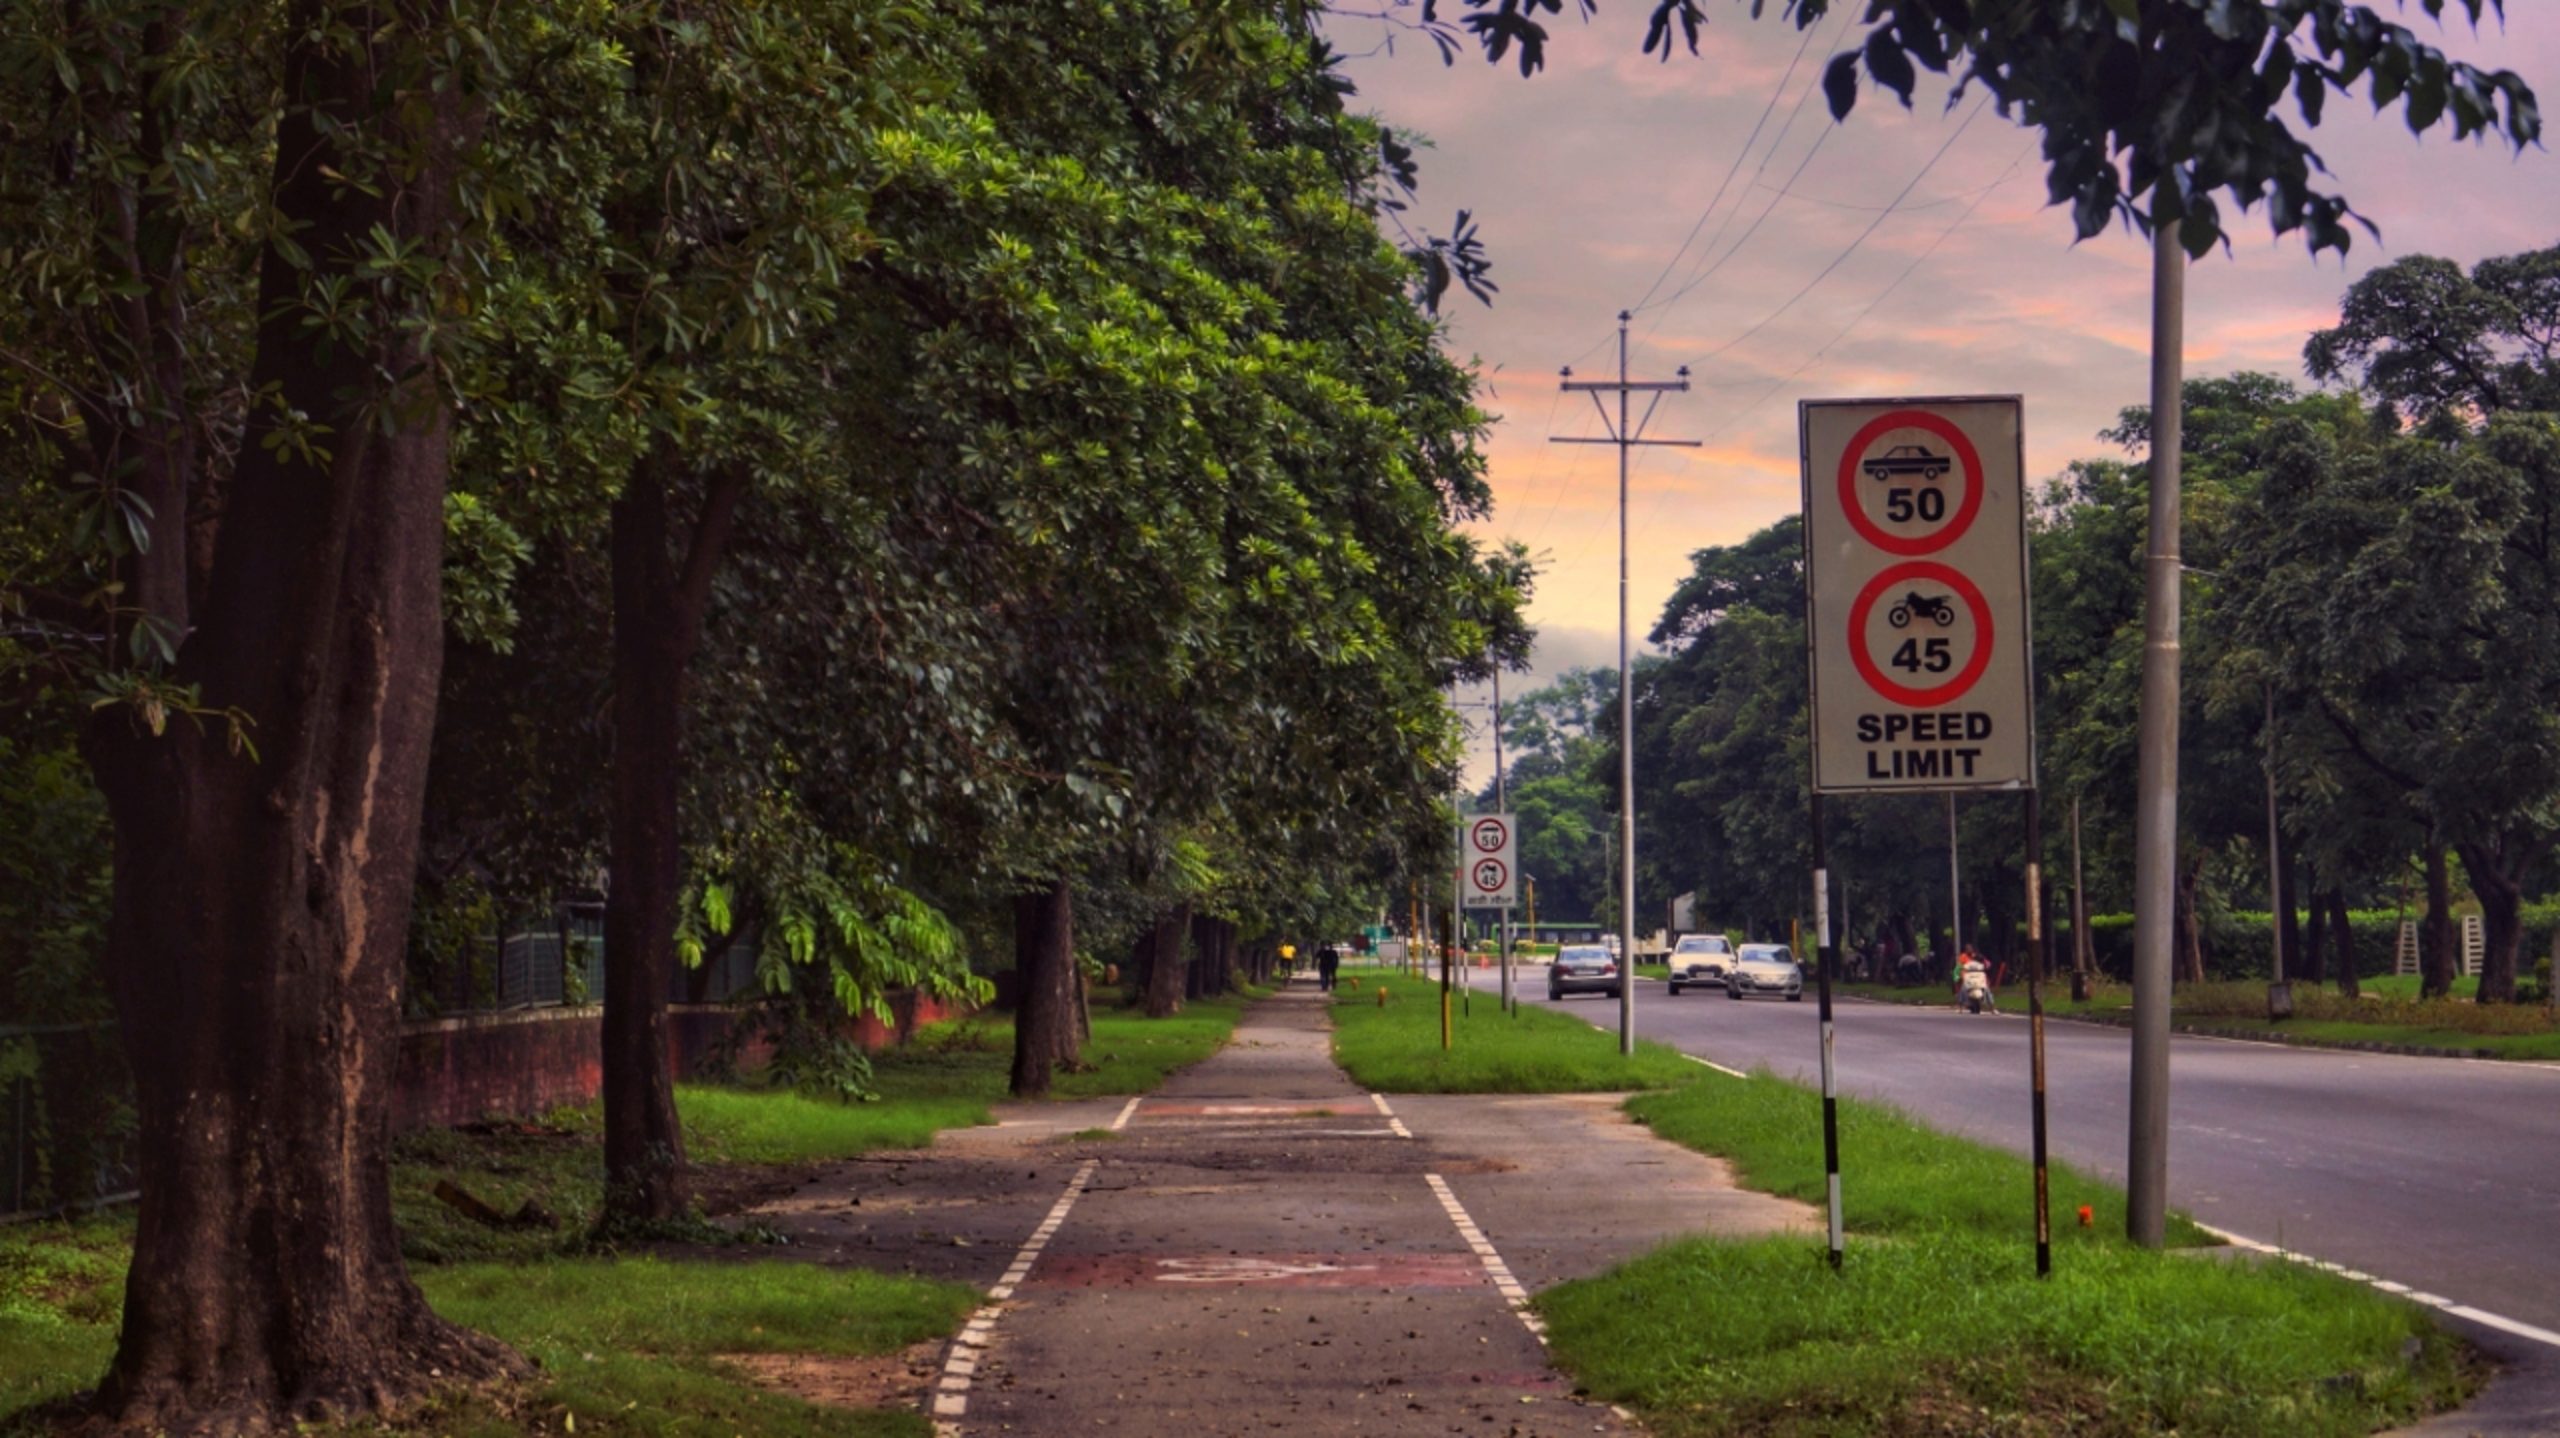 Speed limit board on the roads of Chandigarh.